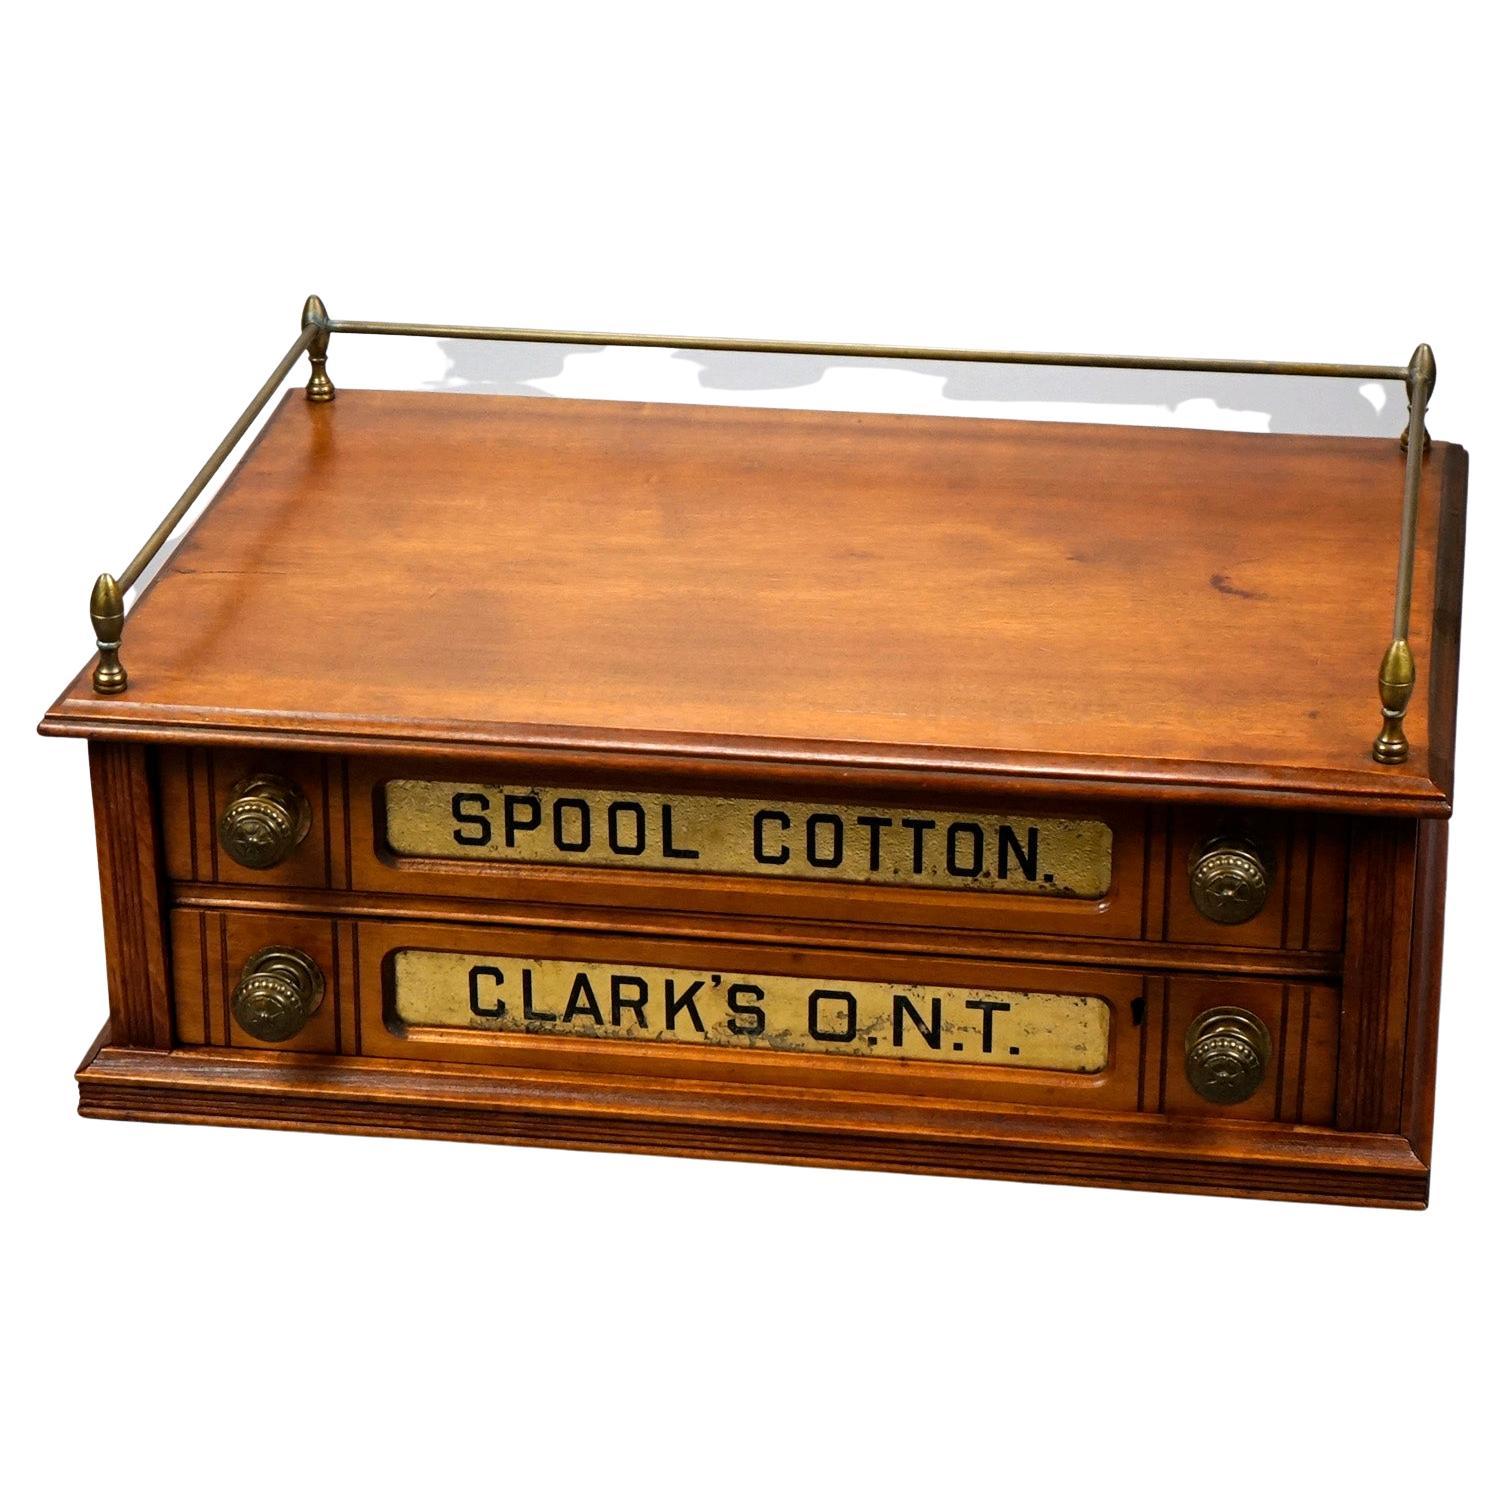 An antique Clark's country store mercantile advertising thread spool cabinet offers mahogany construction with upper gallery having brass rail over double drawer paneled case with advertising display, c1890

Measures- 9.5''H x 22.25''W x 15.5''D.